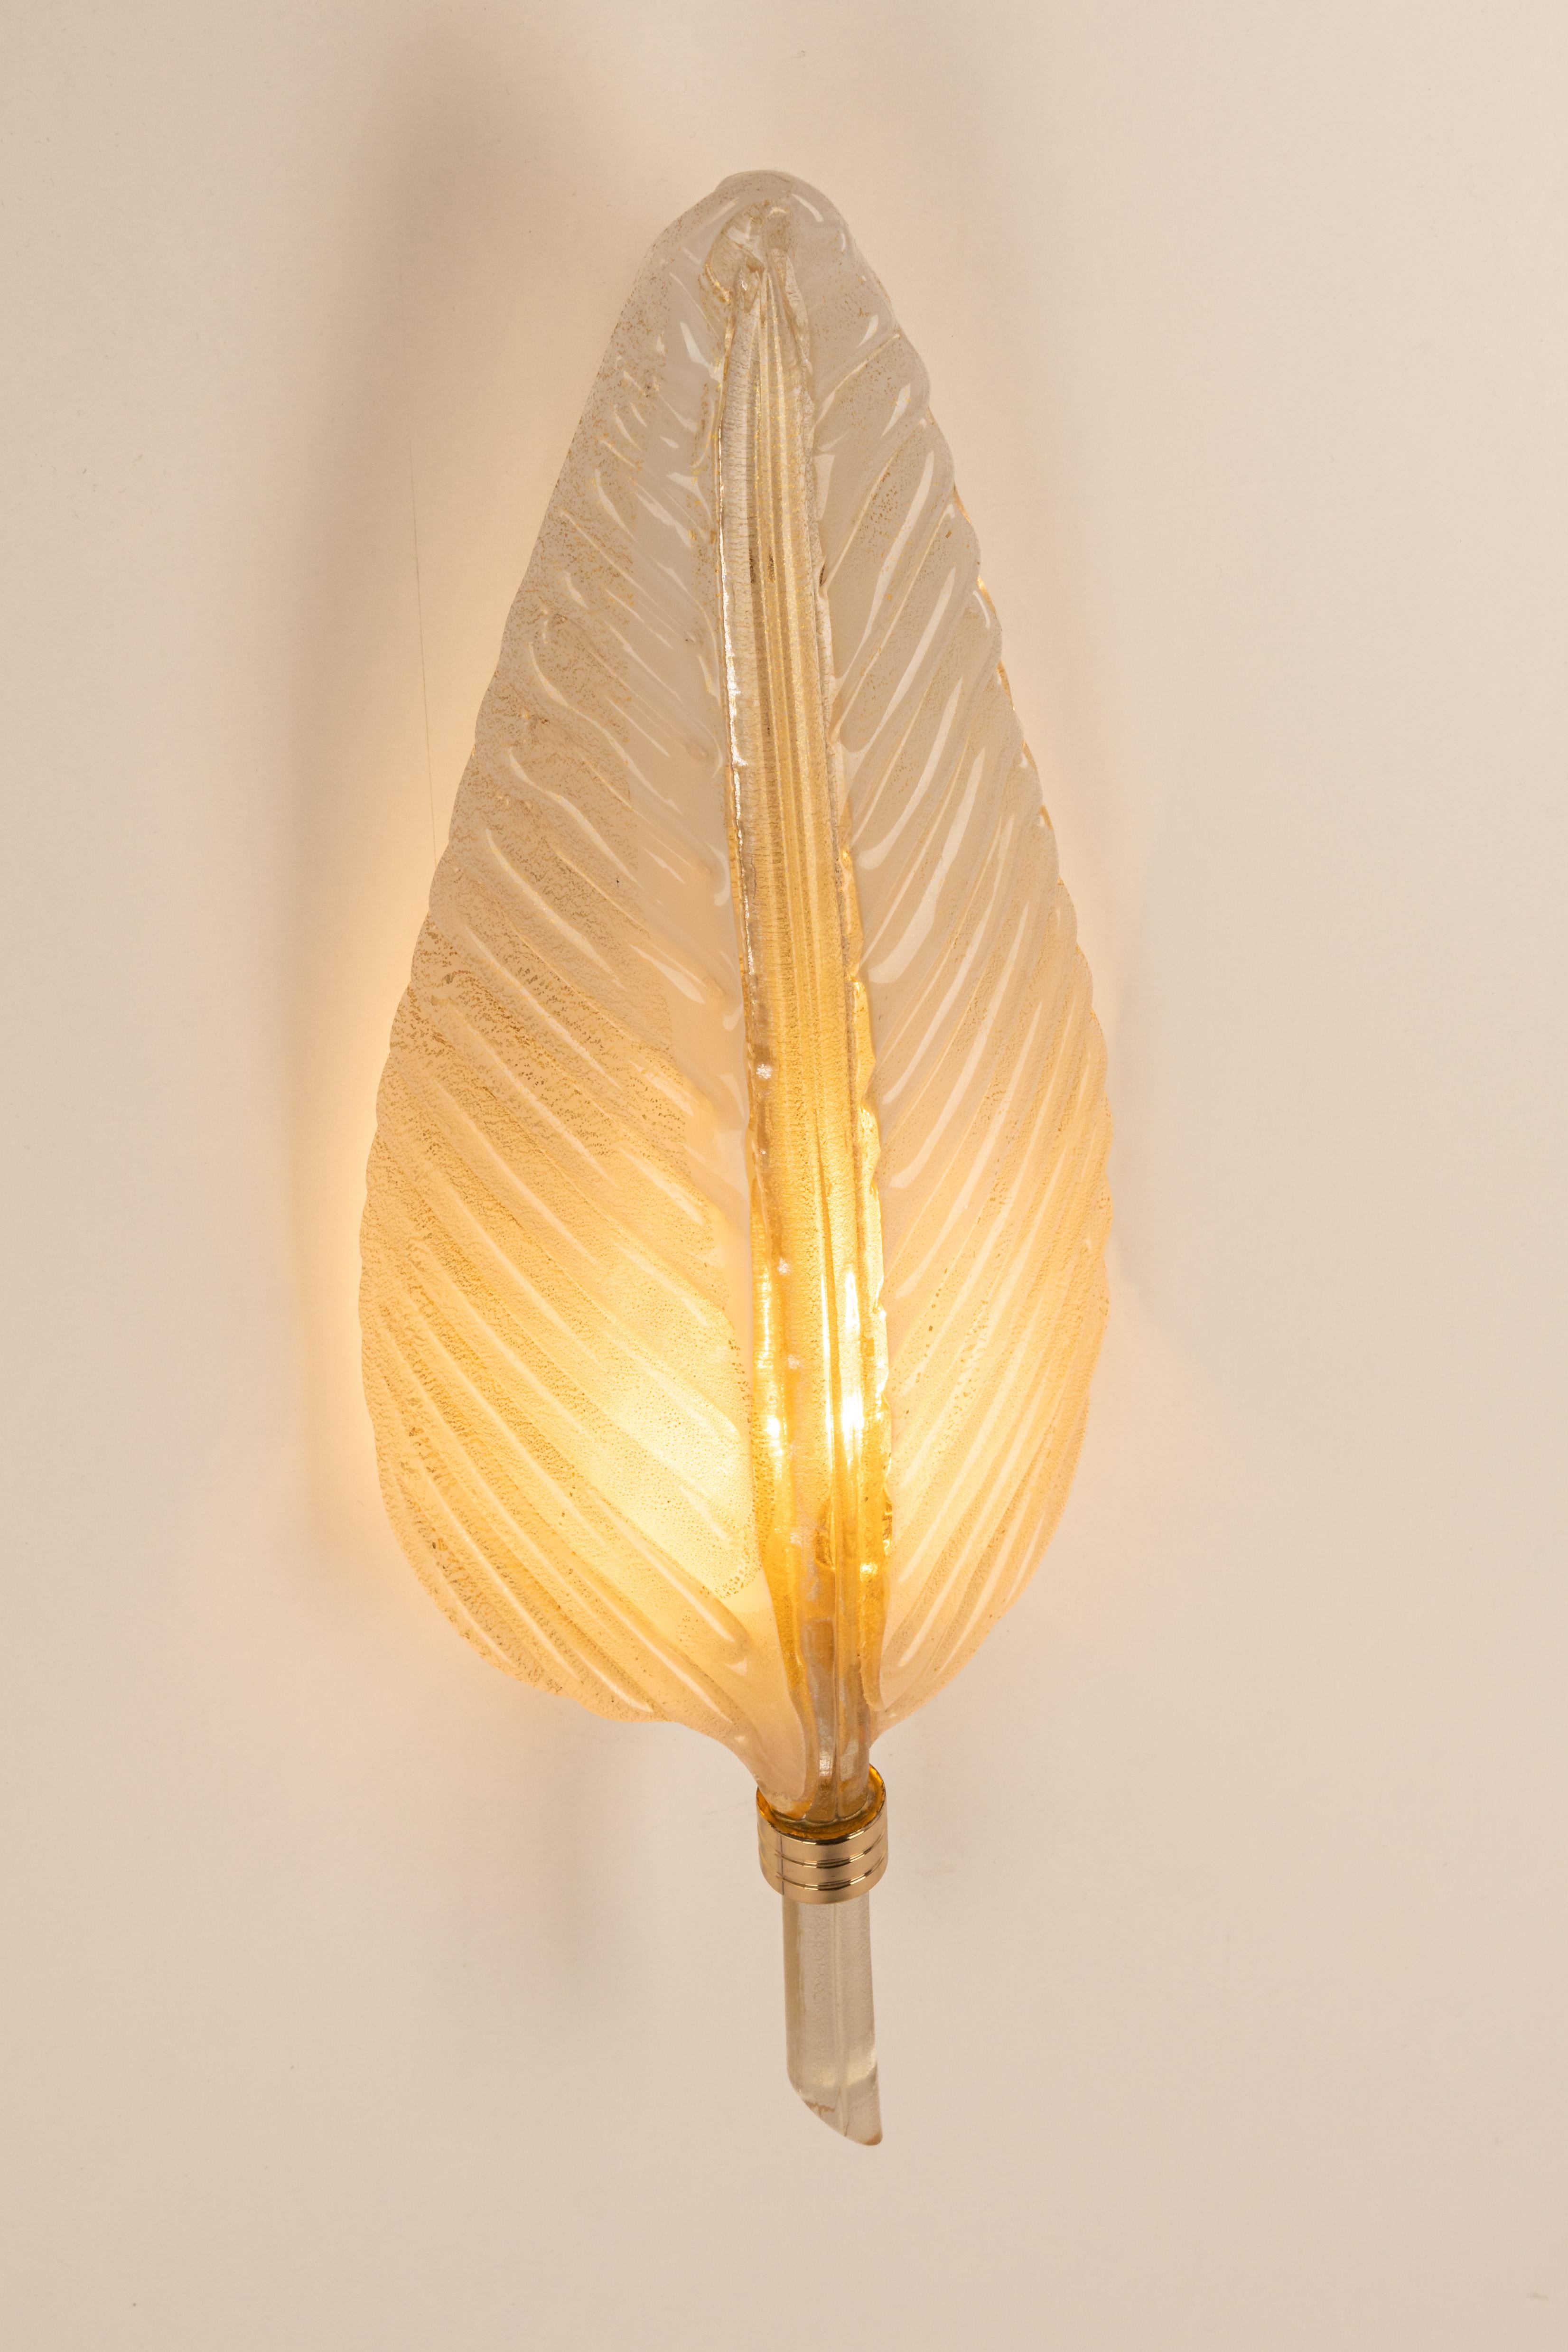 Pair of Murano Glass Wall Sconces by Barovier & Toso, Italy, 1970s For Sale 3